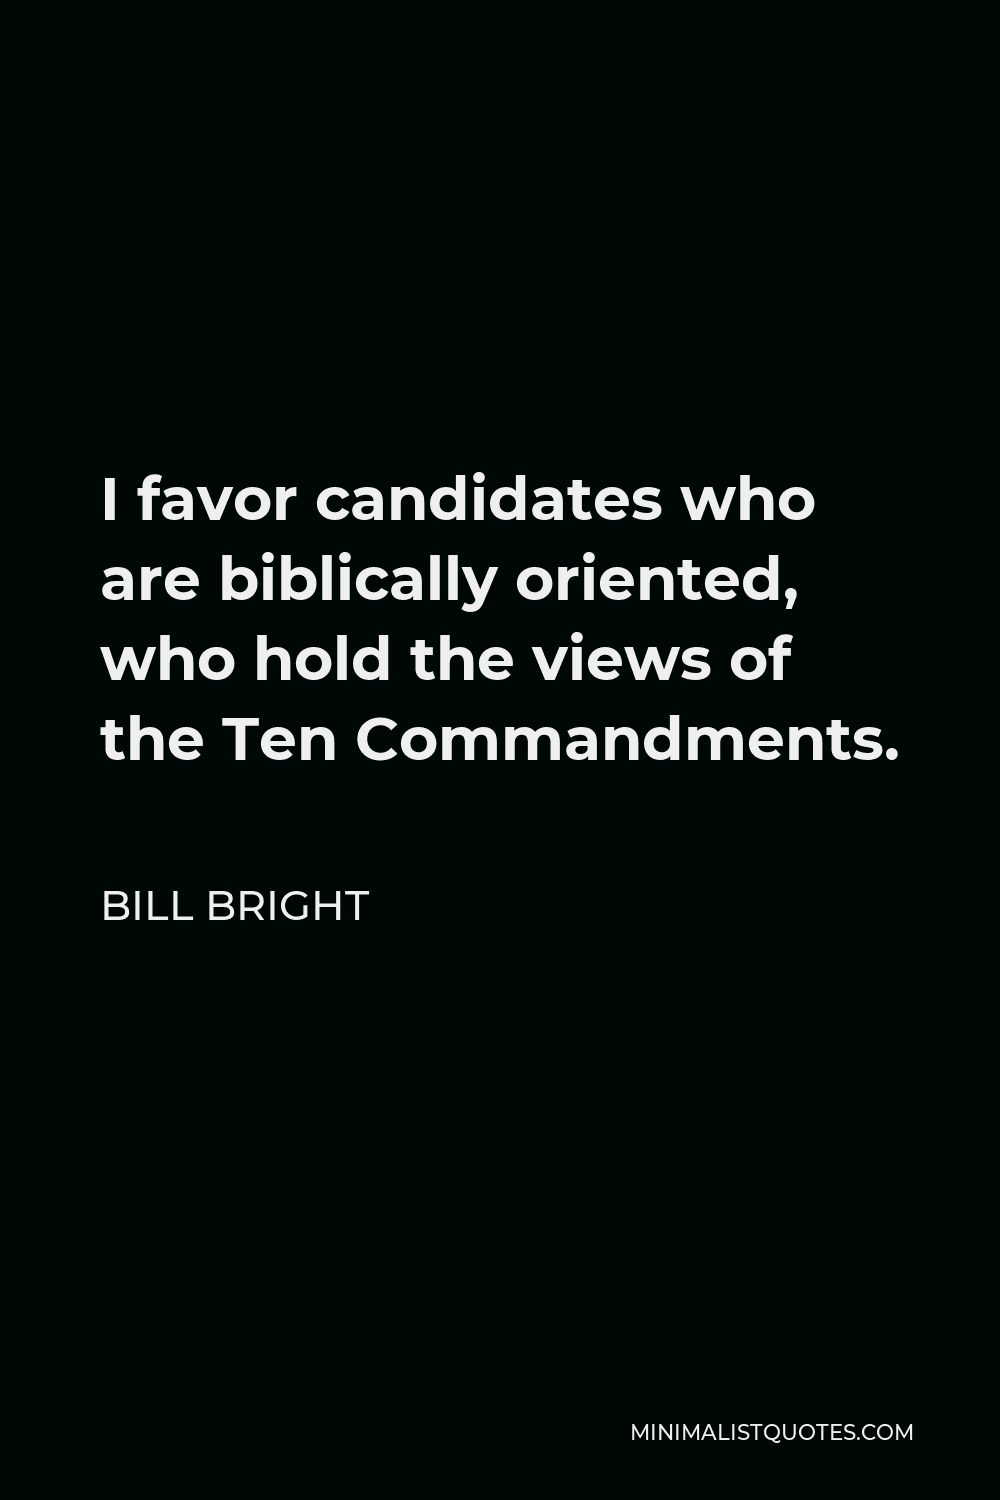 Bill Bright Quote - I favor candidates who are biblically oriented, who hold the views of the Ten Commandments.